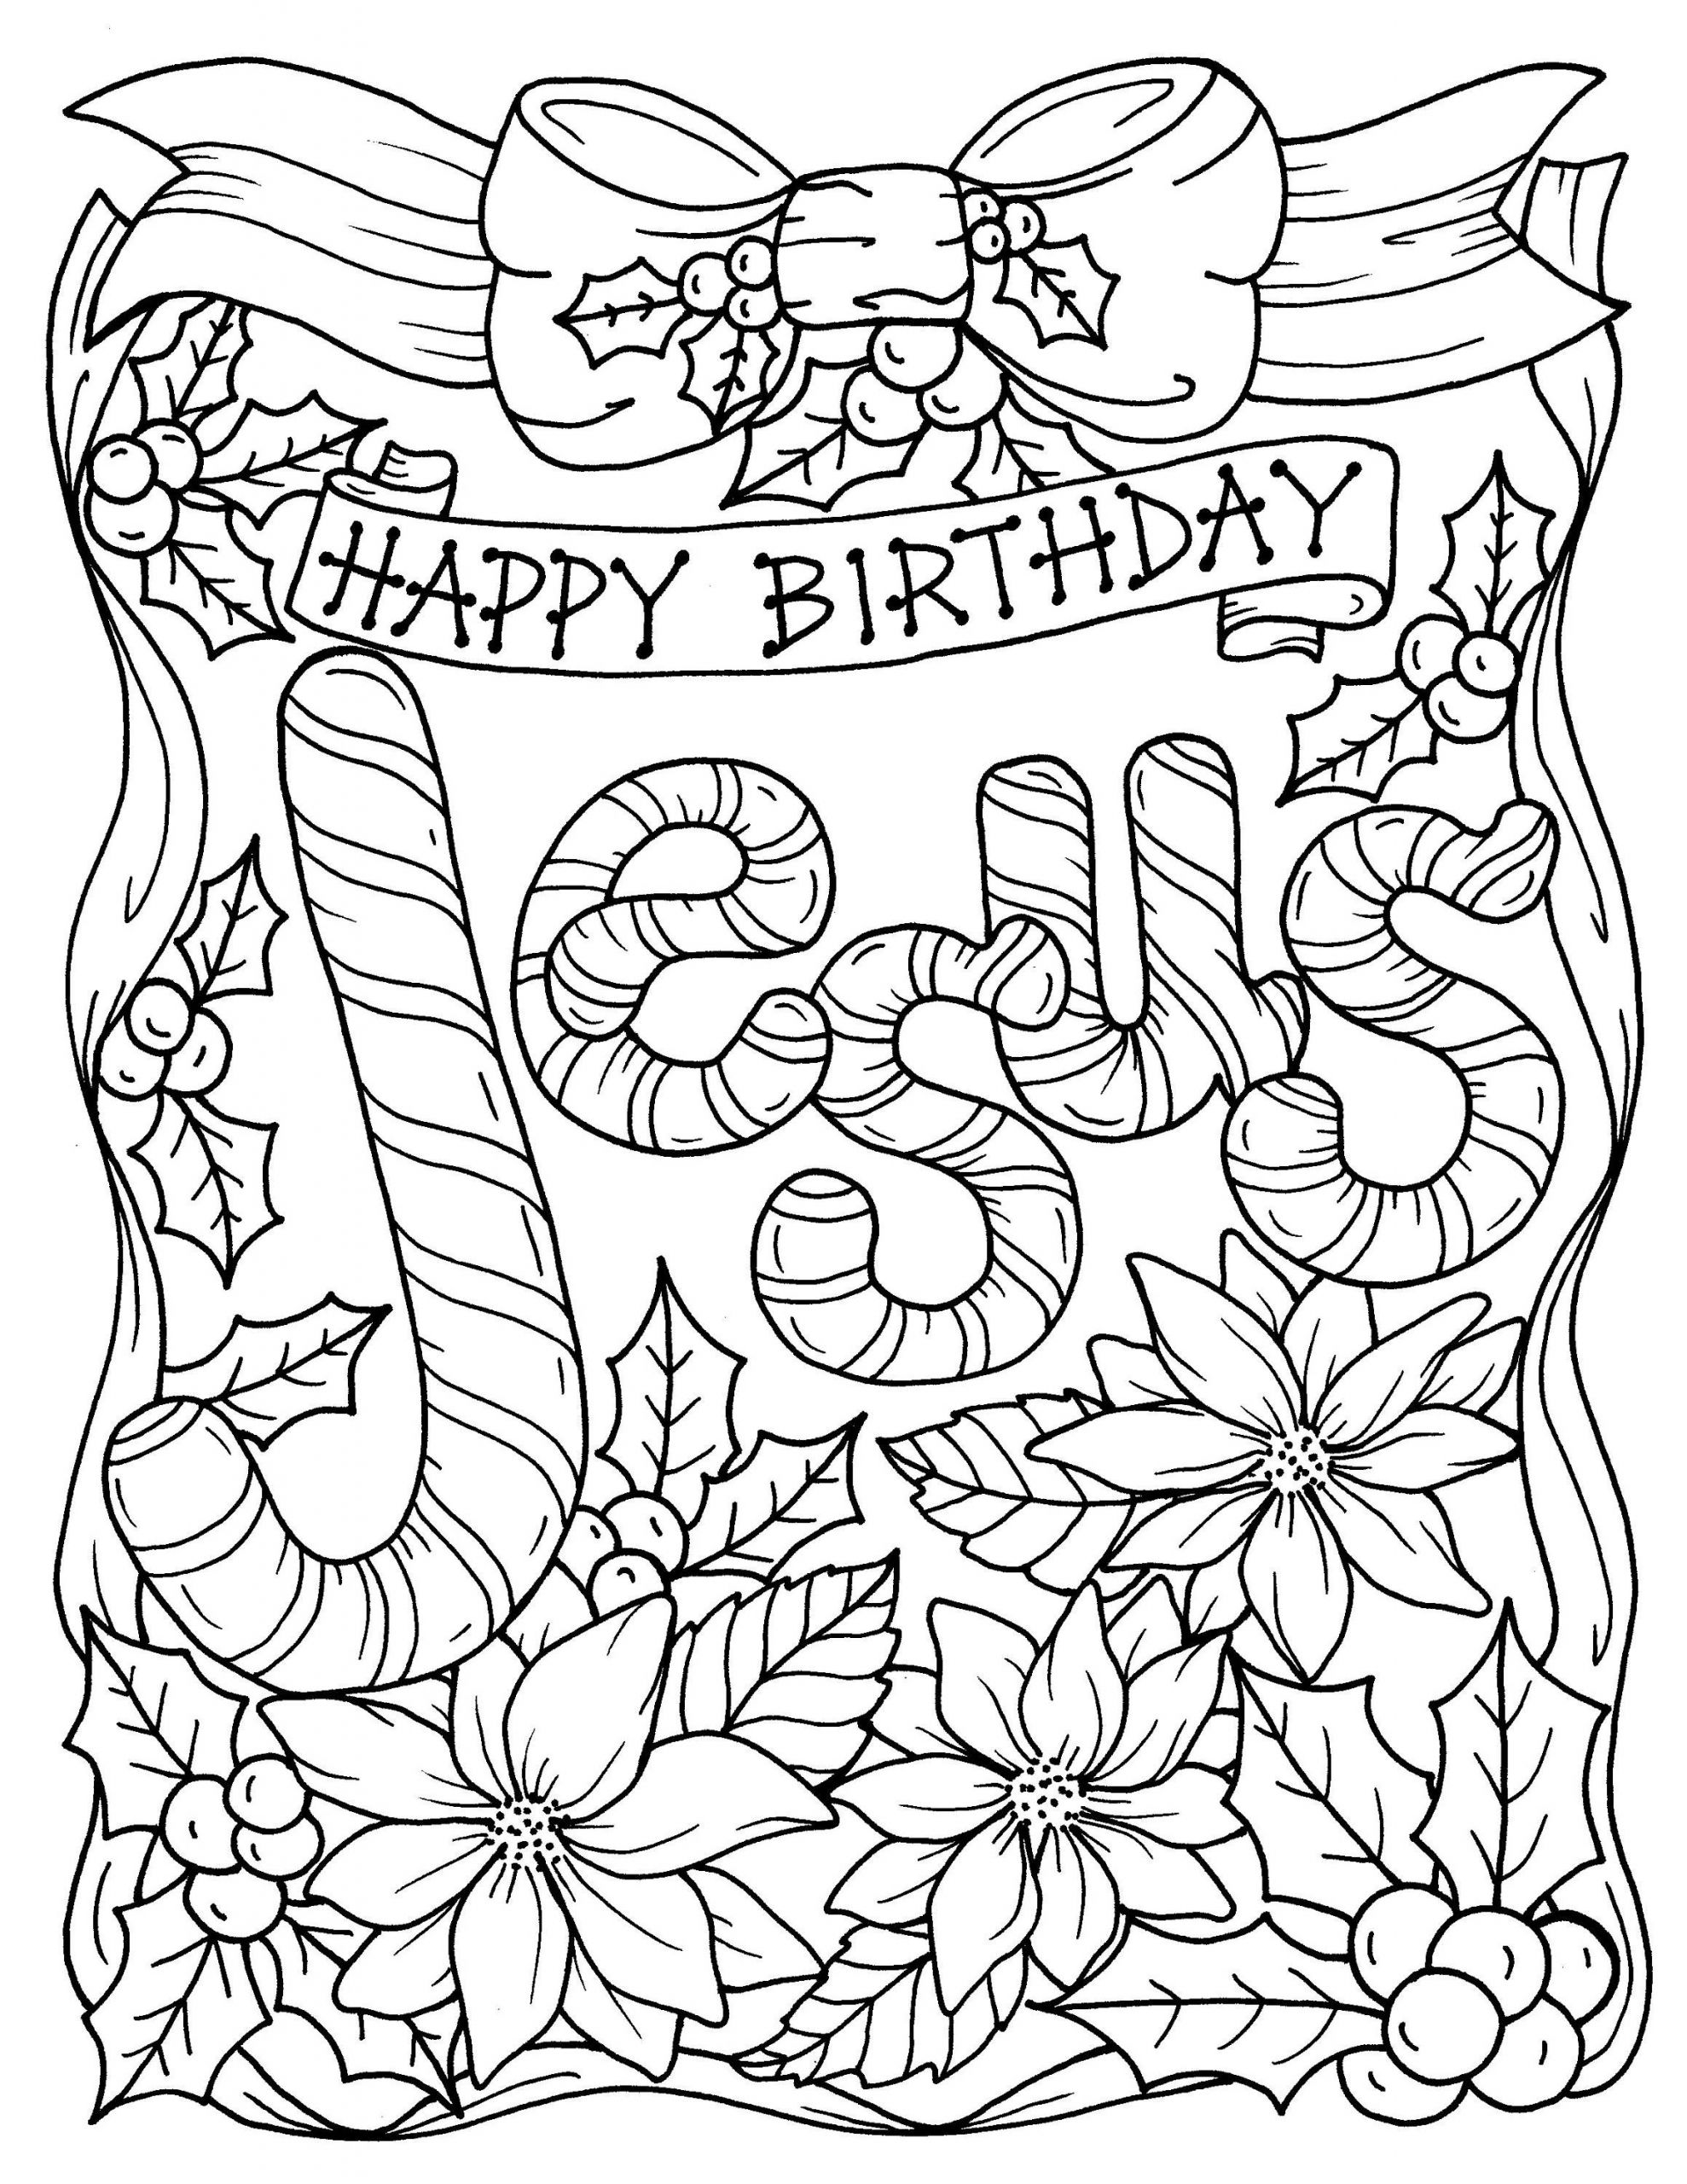 Jesus Coloring Pages For Adults
 5 Pages Christmas Coloring Christian Religious scripture